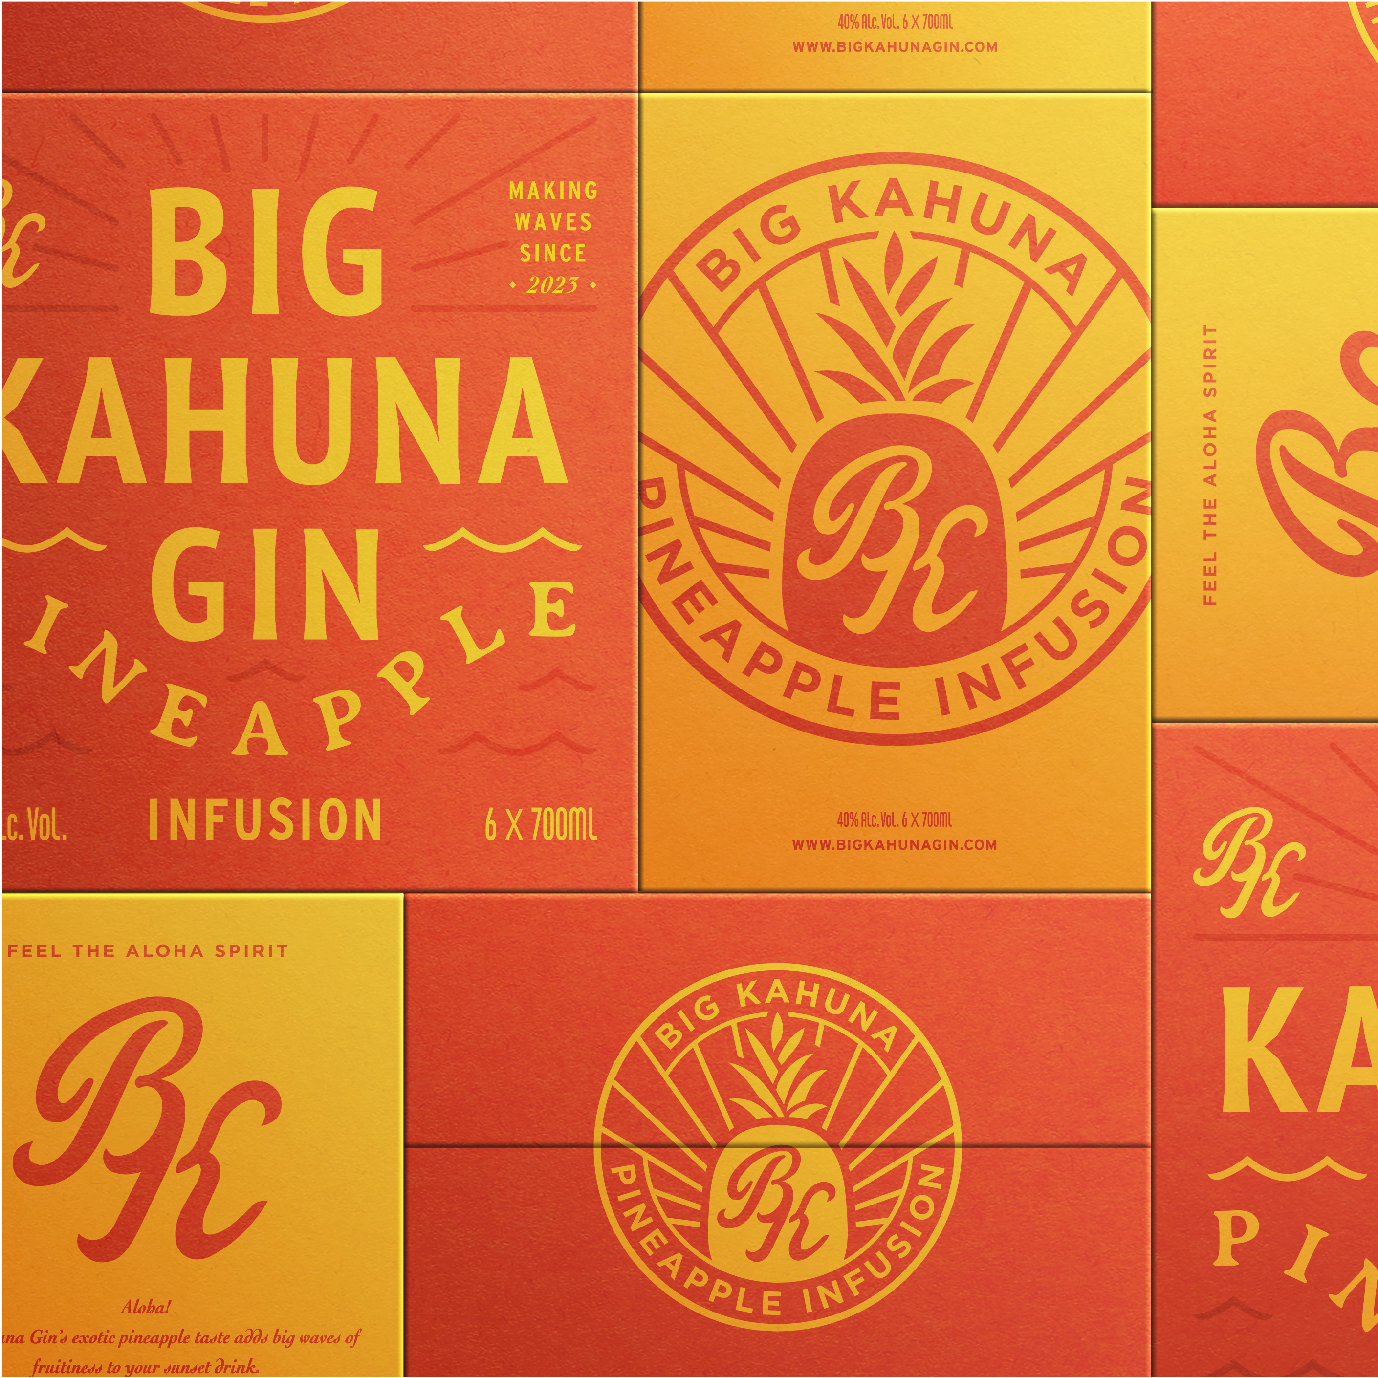 Leaning Into The Pineapple Flavor With Big Kahuna Gin | Dieline - Design,  Branding & Packaging Inspiration